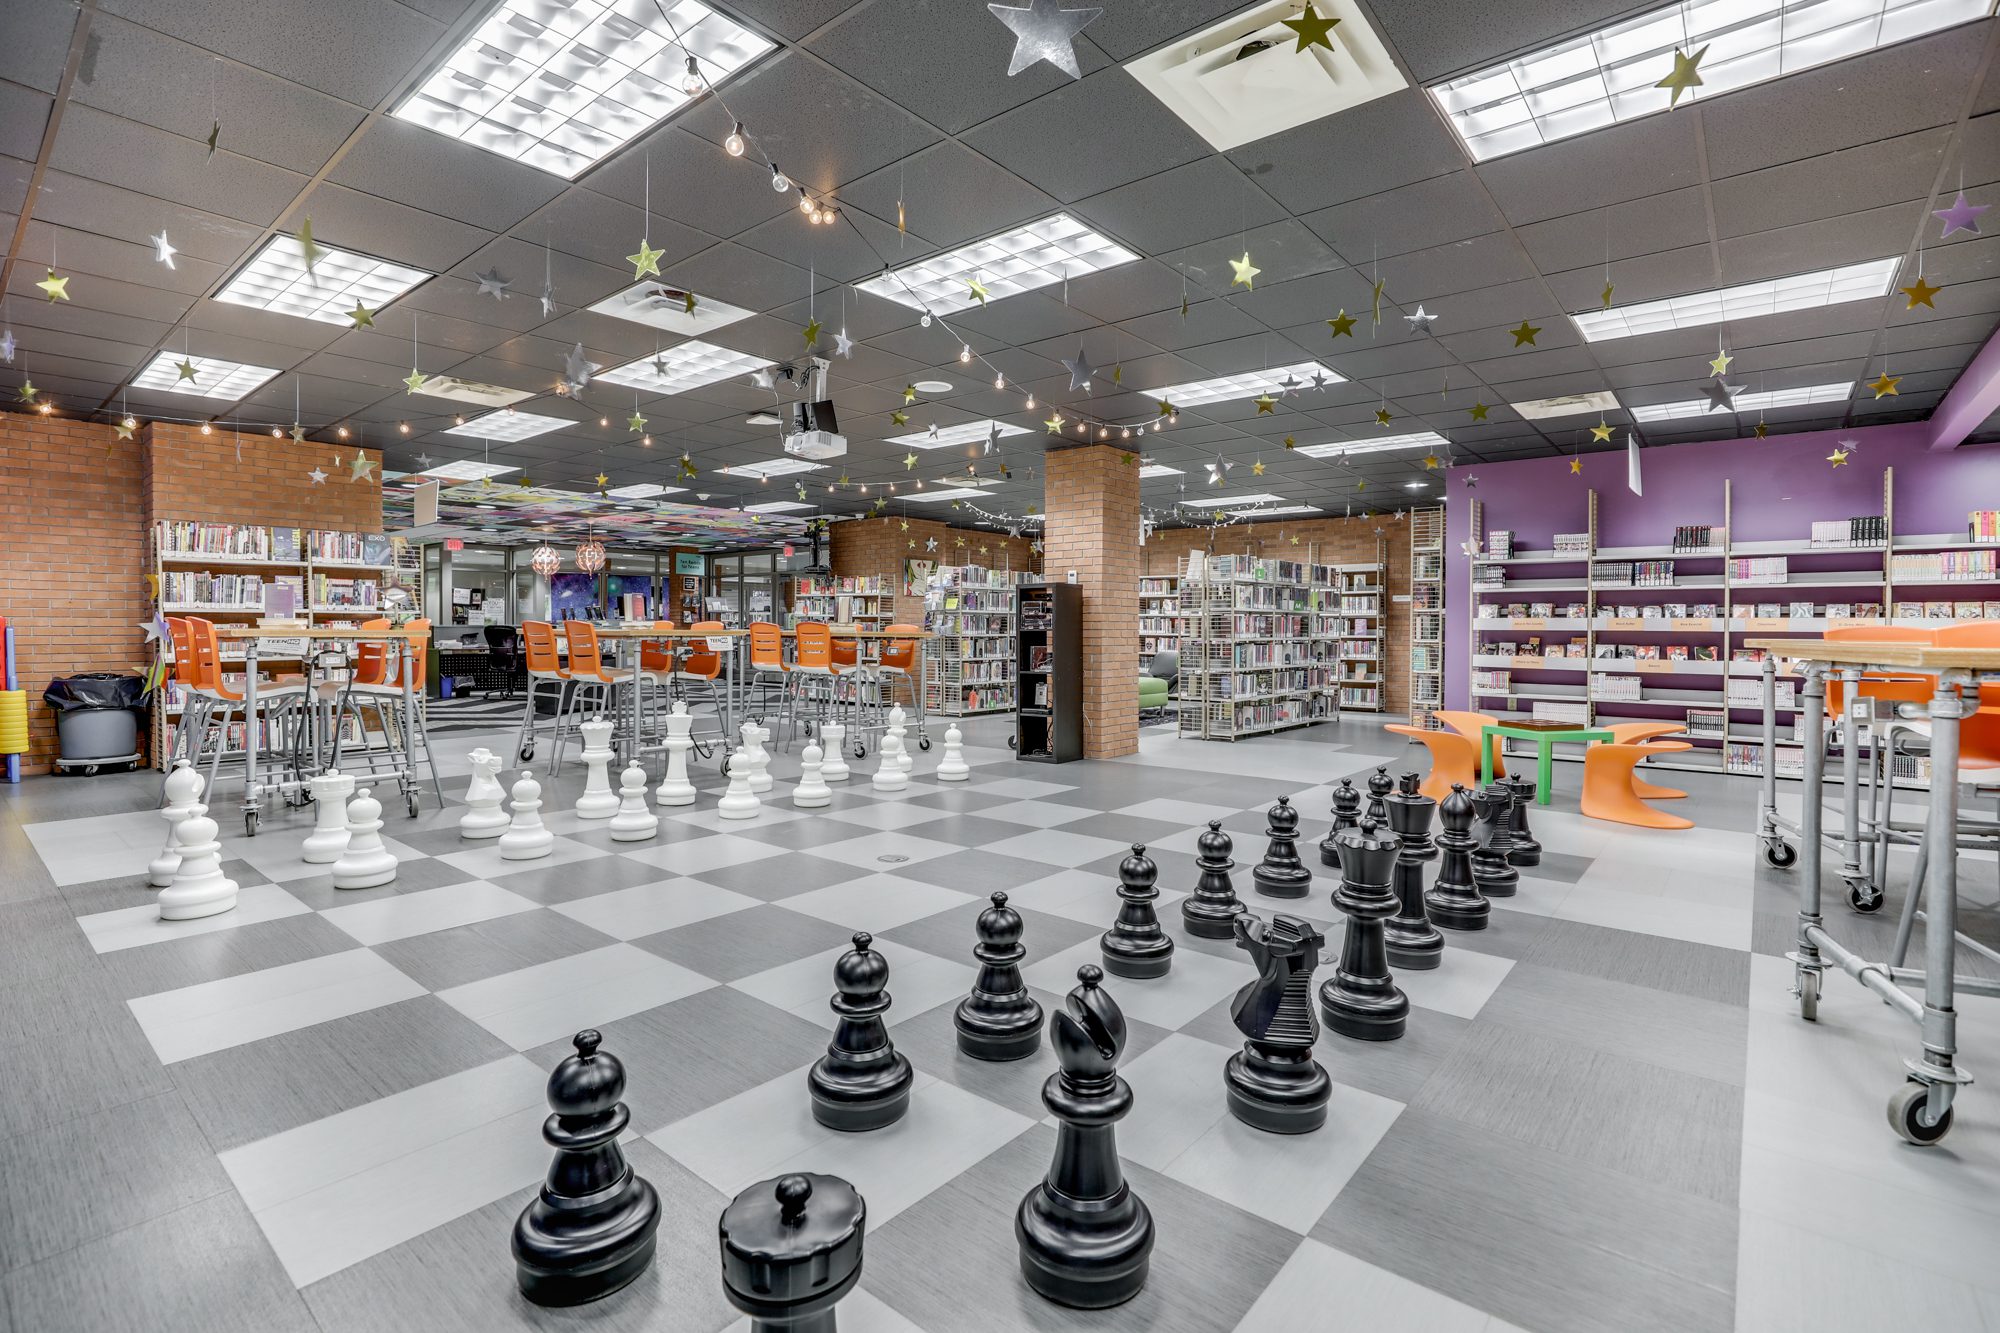 Play Giant Chess at the Greenwood Public Library